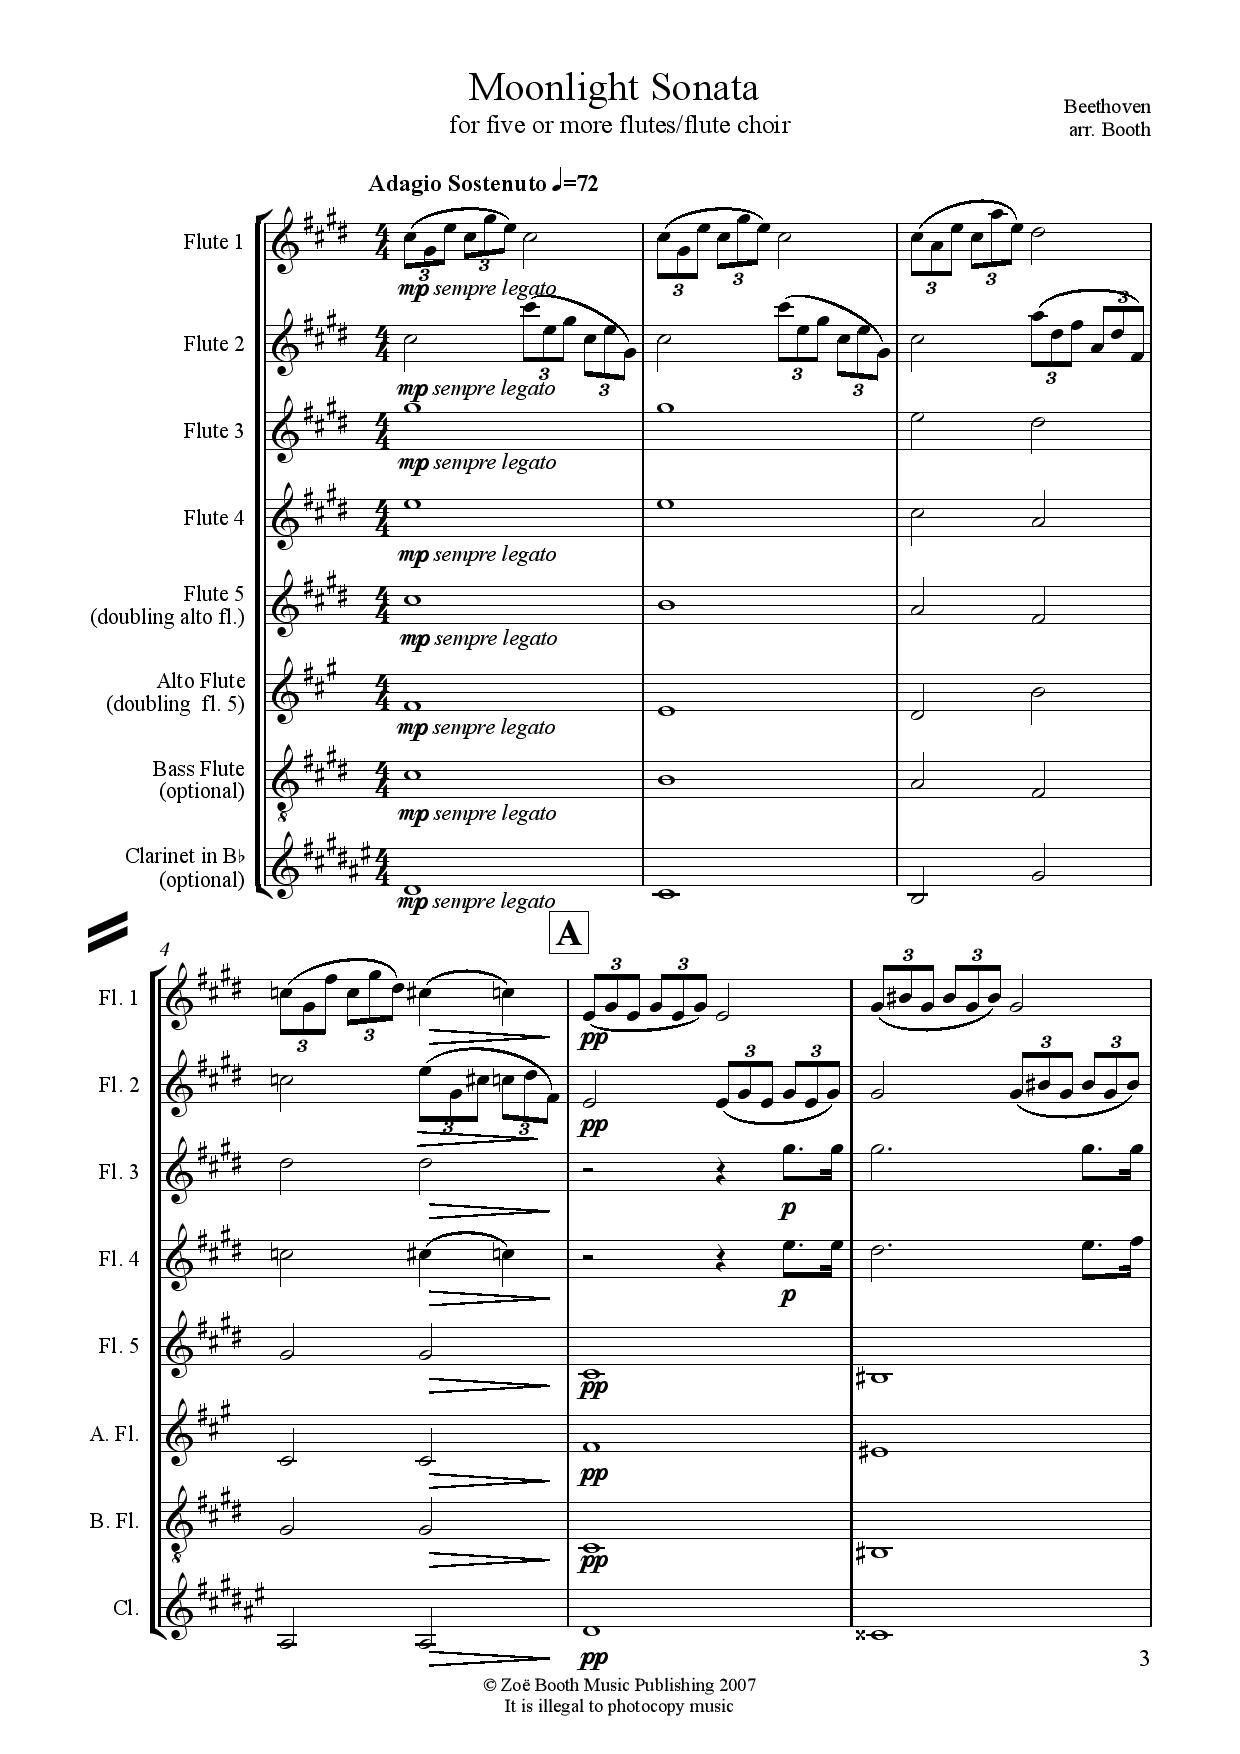 Moonlight Sonata by Beethoven,  arranged by Zoë Booth for five or more flutes/flute choir